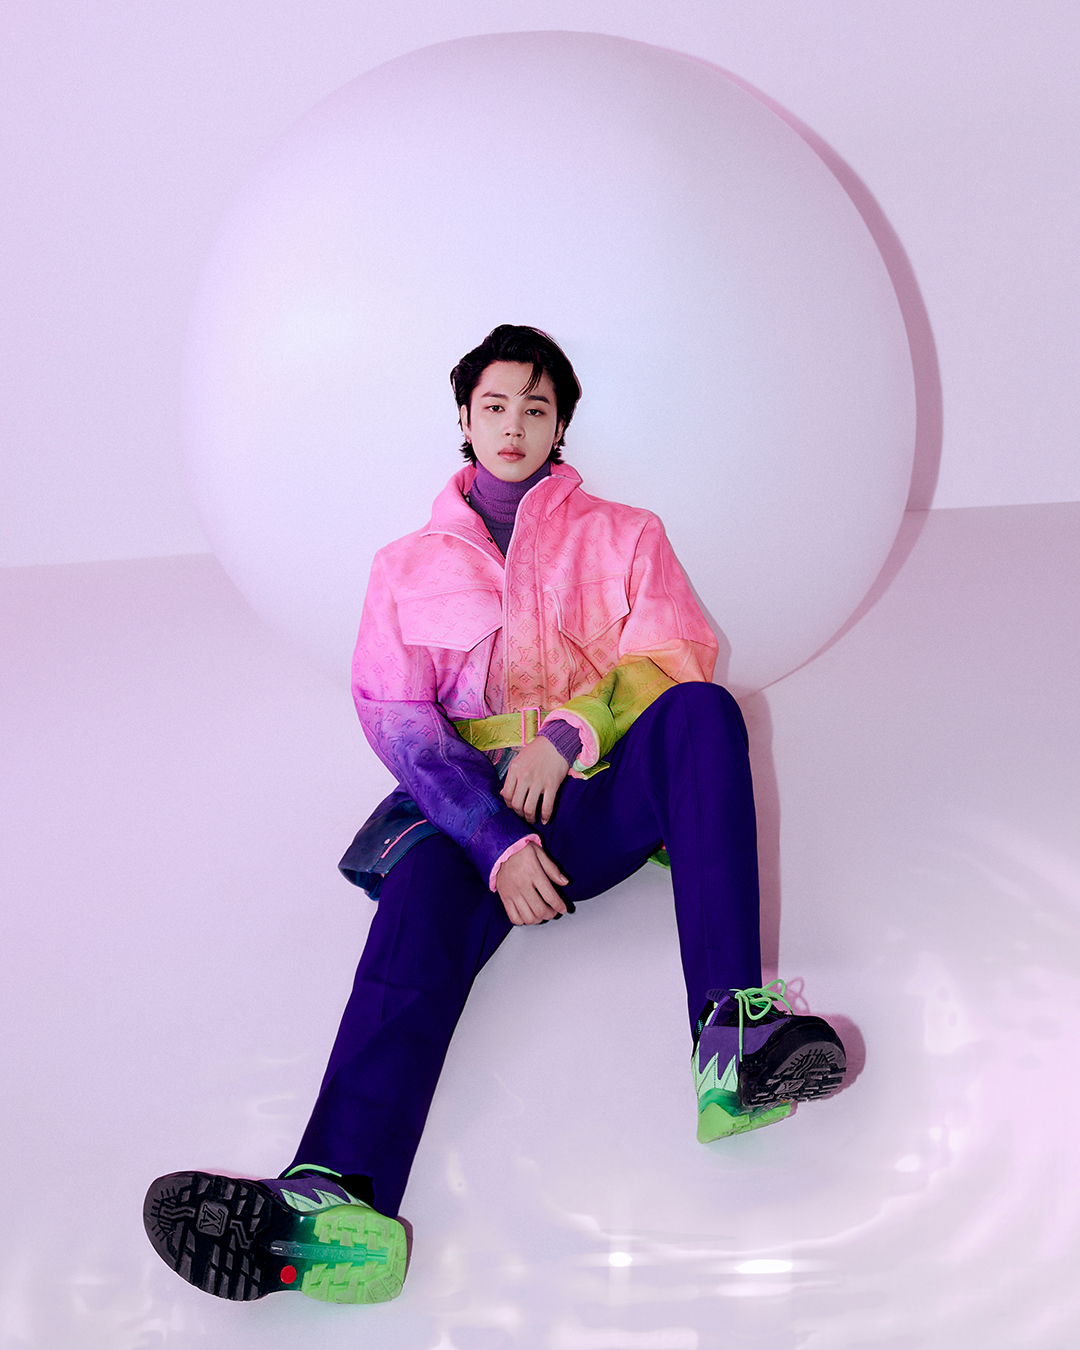 Louis Vuitton on X: #JungKook in #LouisVuitton. The @bts_twt member and  House Ambassador is photographed for the January 2022 Special Editions of  @VogueKorea and @GQKorea in pieces from the #LVMenSS22 Collection by